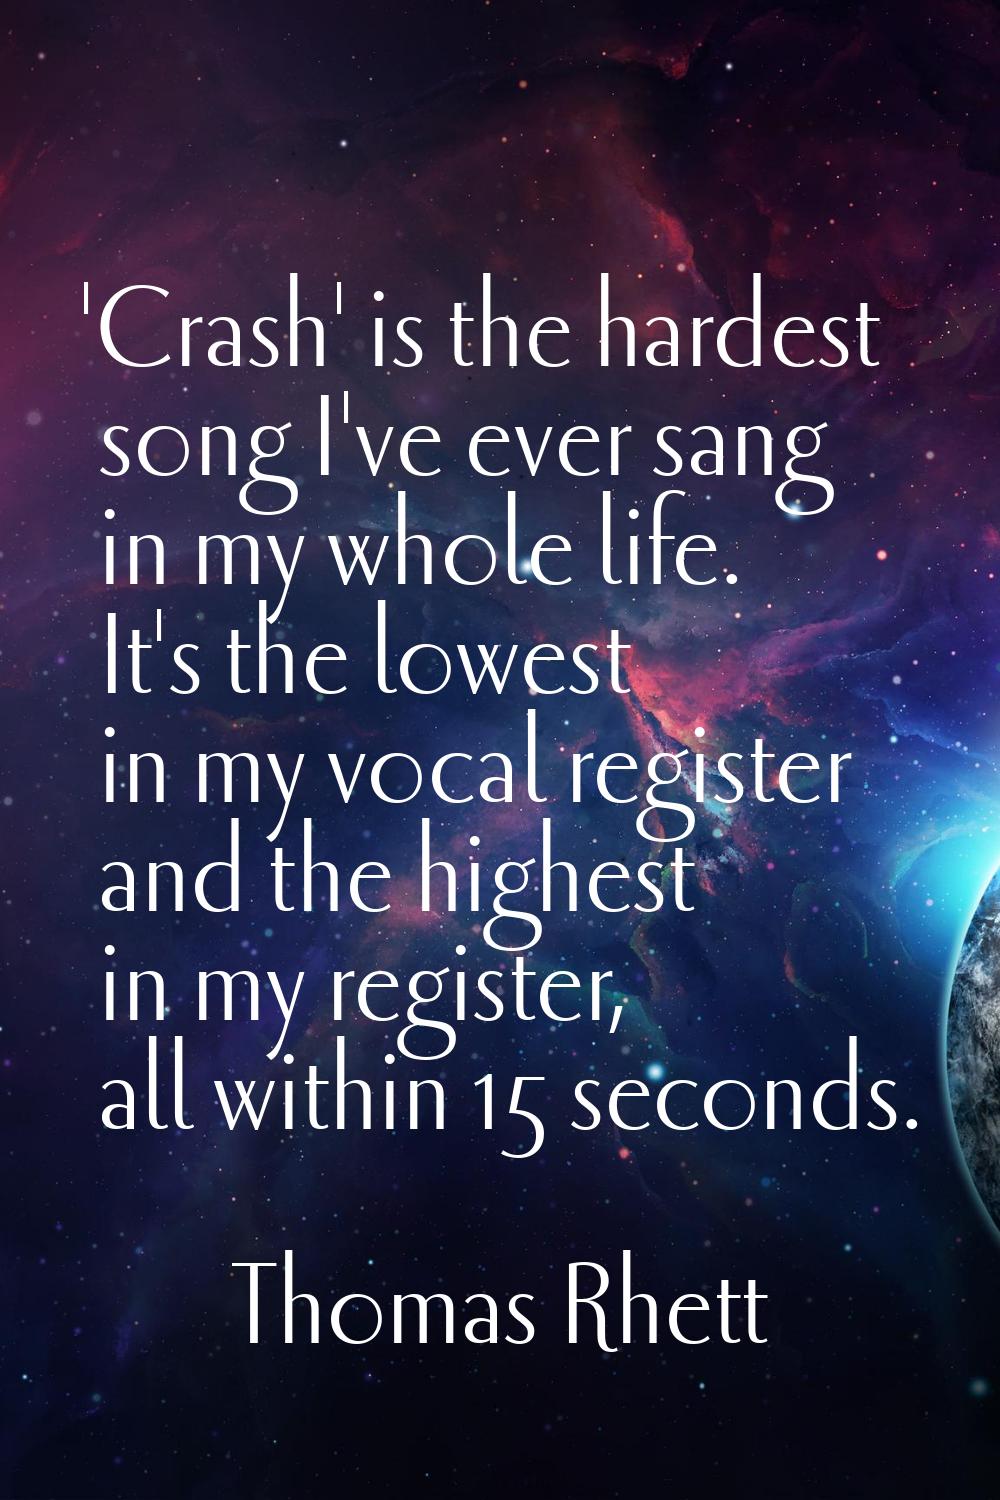 'Crash' is the hardest song I've ever sang in my whole life. It's the lowest in my vocal register a